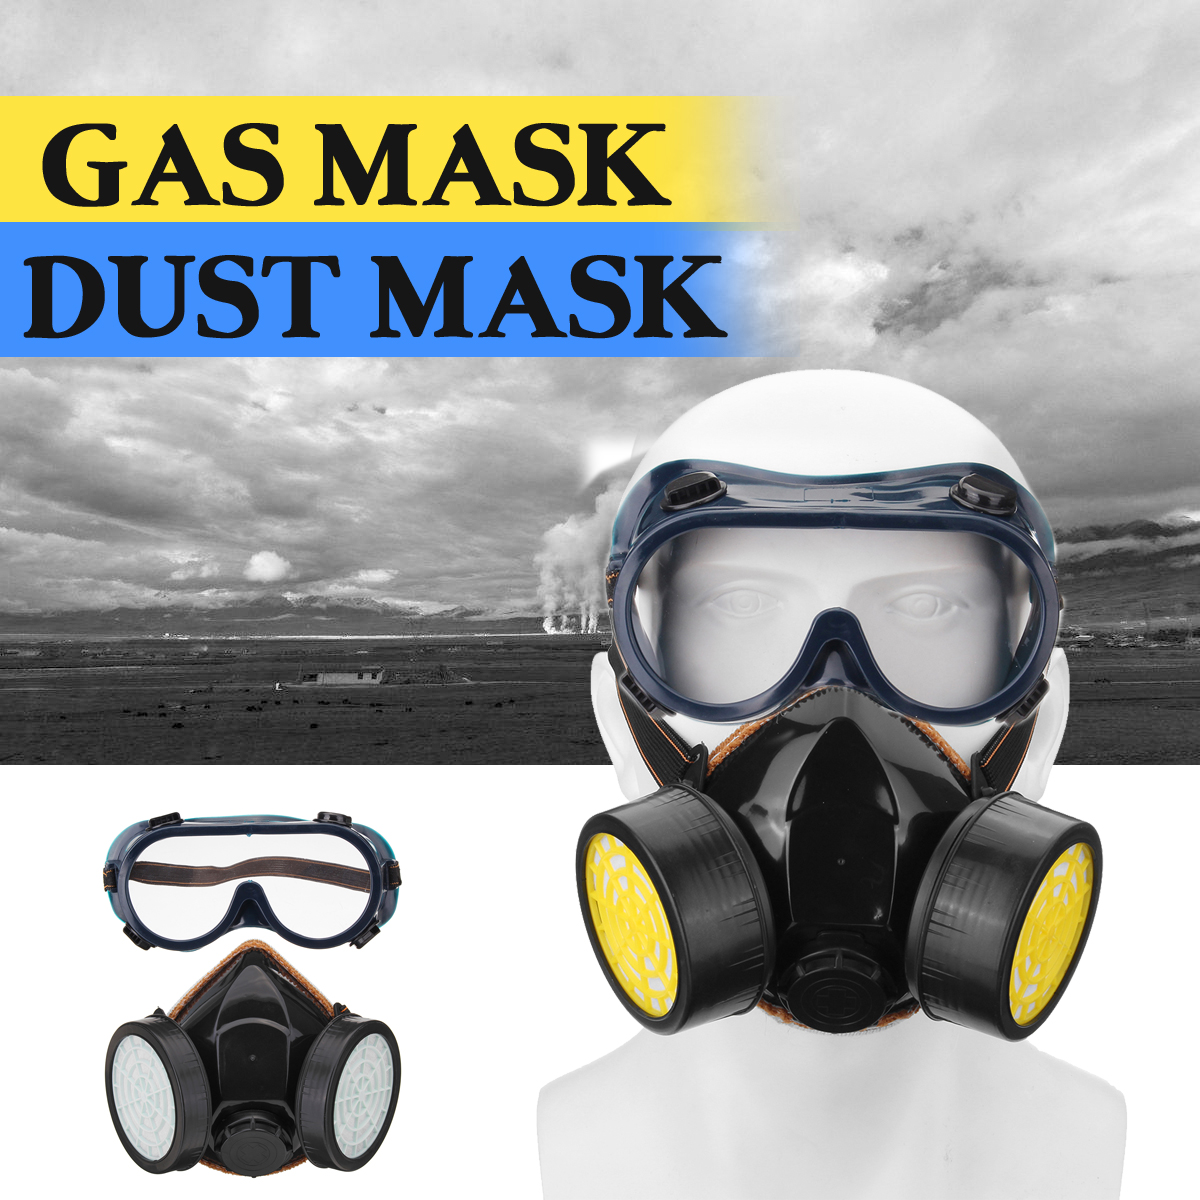 Gas-Mask-Protection-Filter-Chemical-Respirator-Safety-Dust-Mask-Paint-Spray-Pesticide-Anti-Dust-Resp-1549268-2